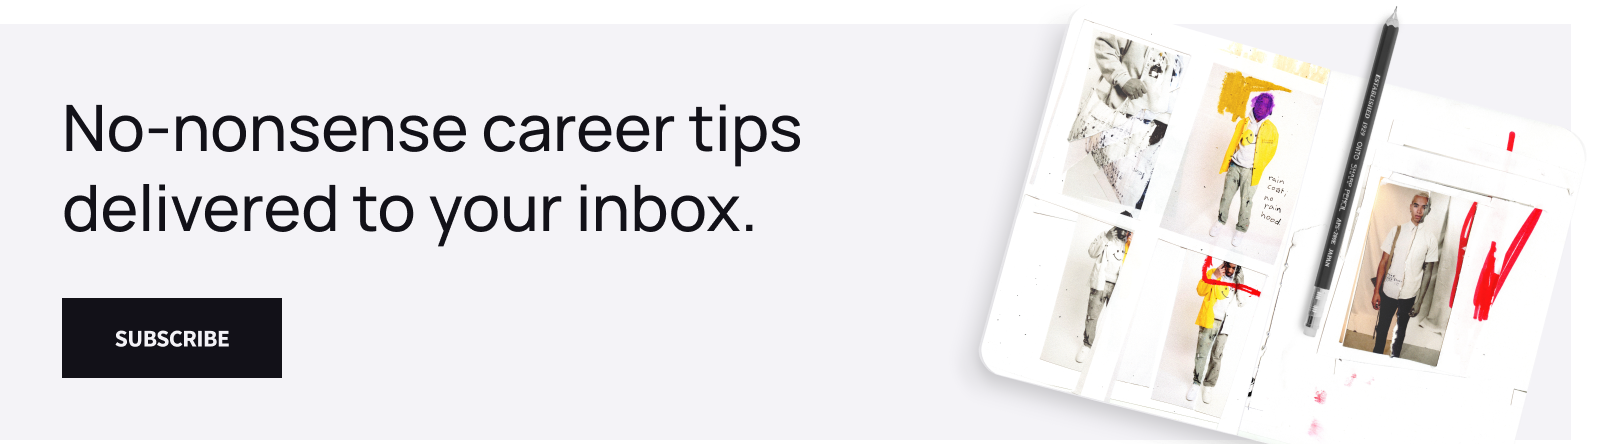 A banner saying "No-nonsense career tips delivered to your inbox." with a subscribe button.